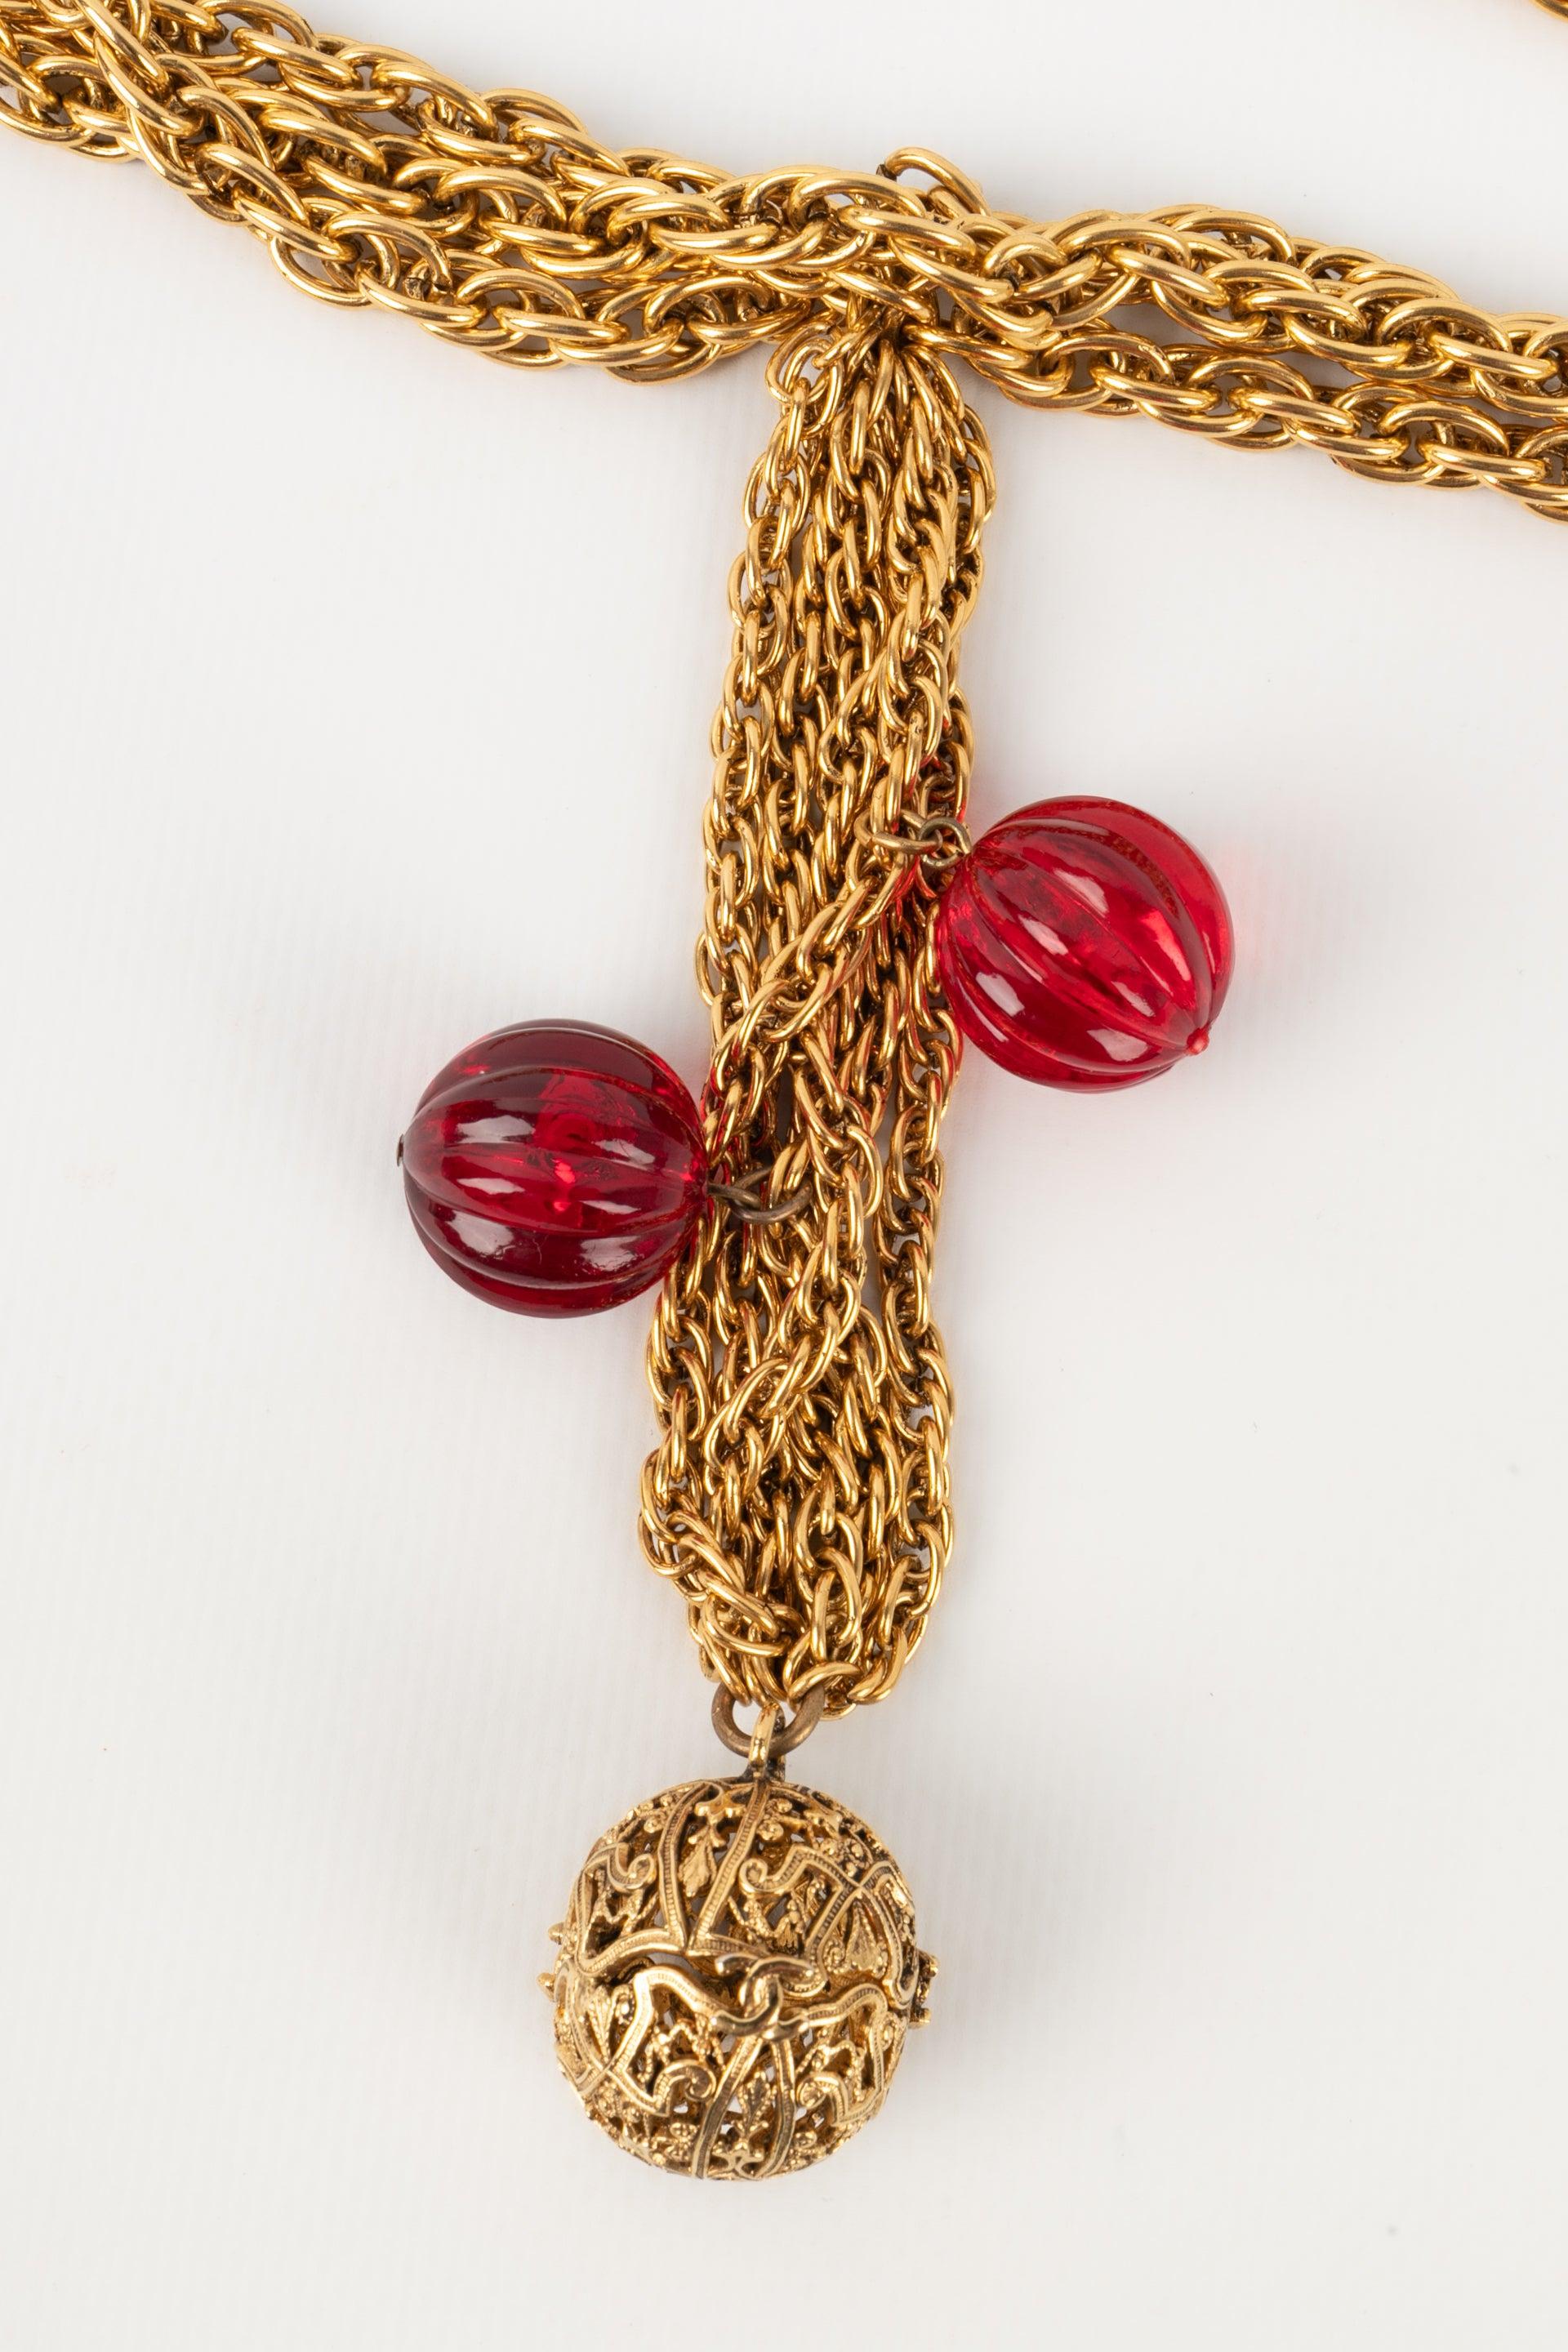 Women's Chanel Golden Metal Necklace with Red Pearls, 1984 For Sale